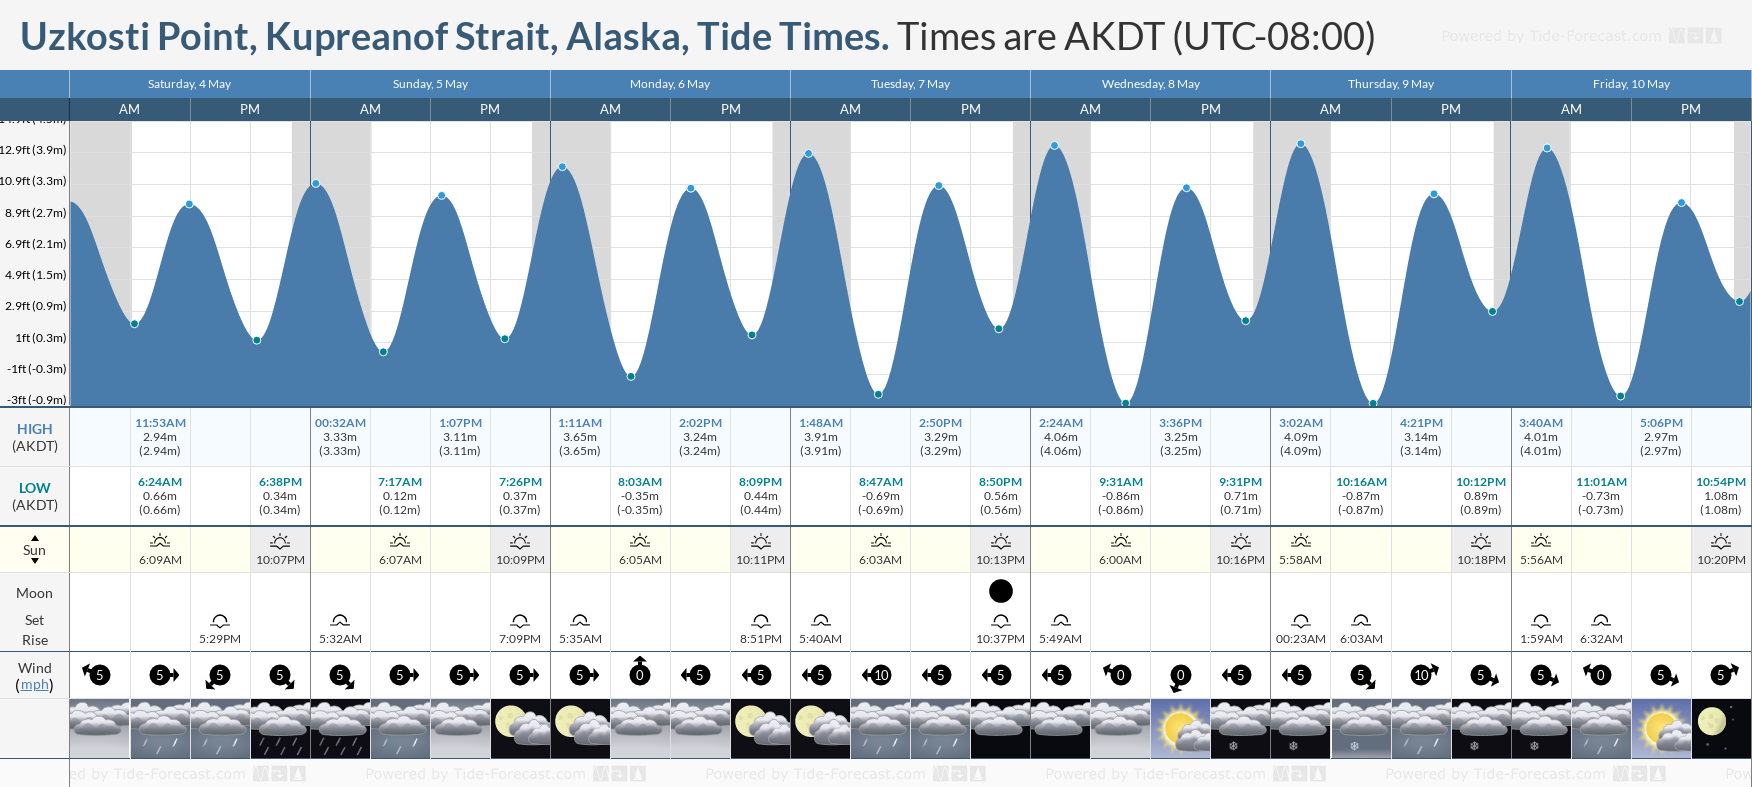 Uzkosti Point, Kupreanof Strait, Alaska Tide Chart including high and low tide tide times for the next 7 days